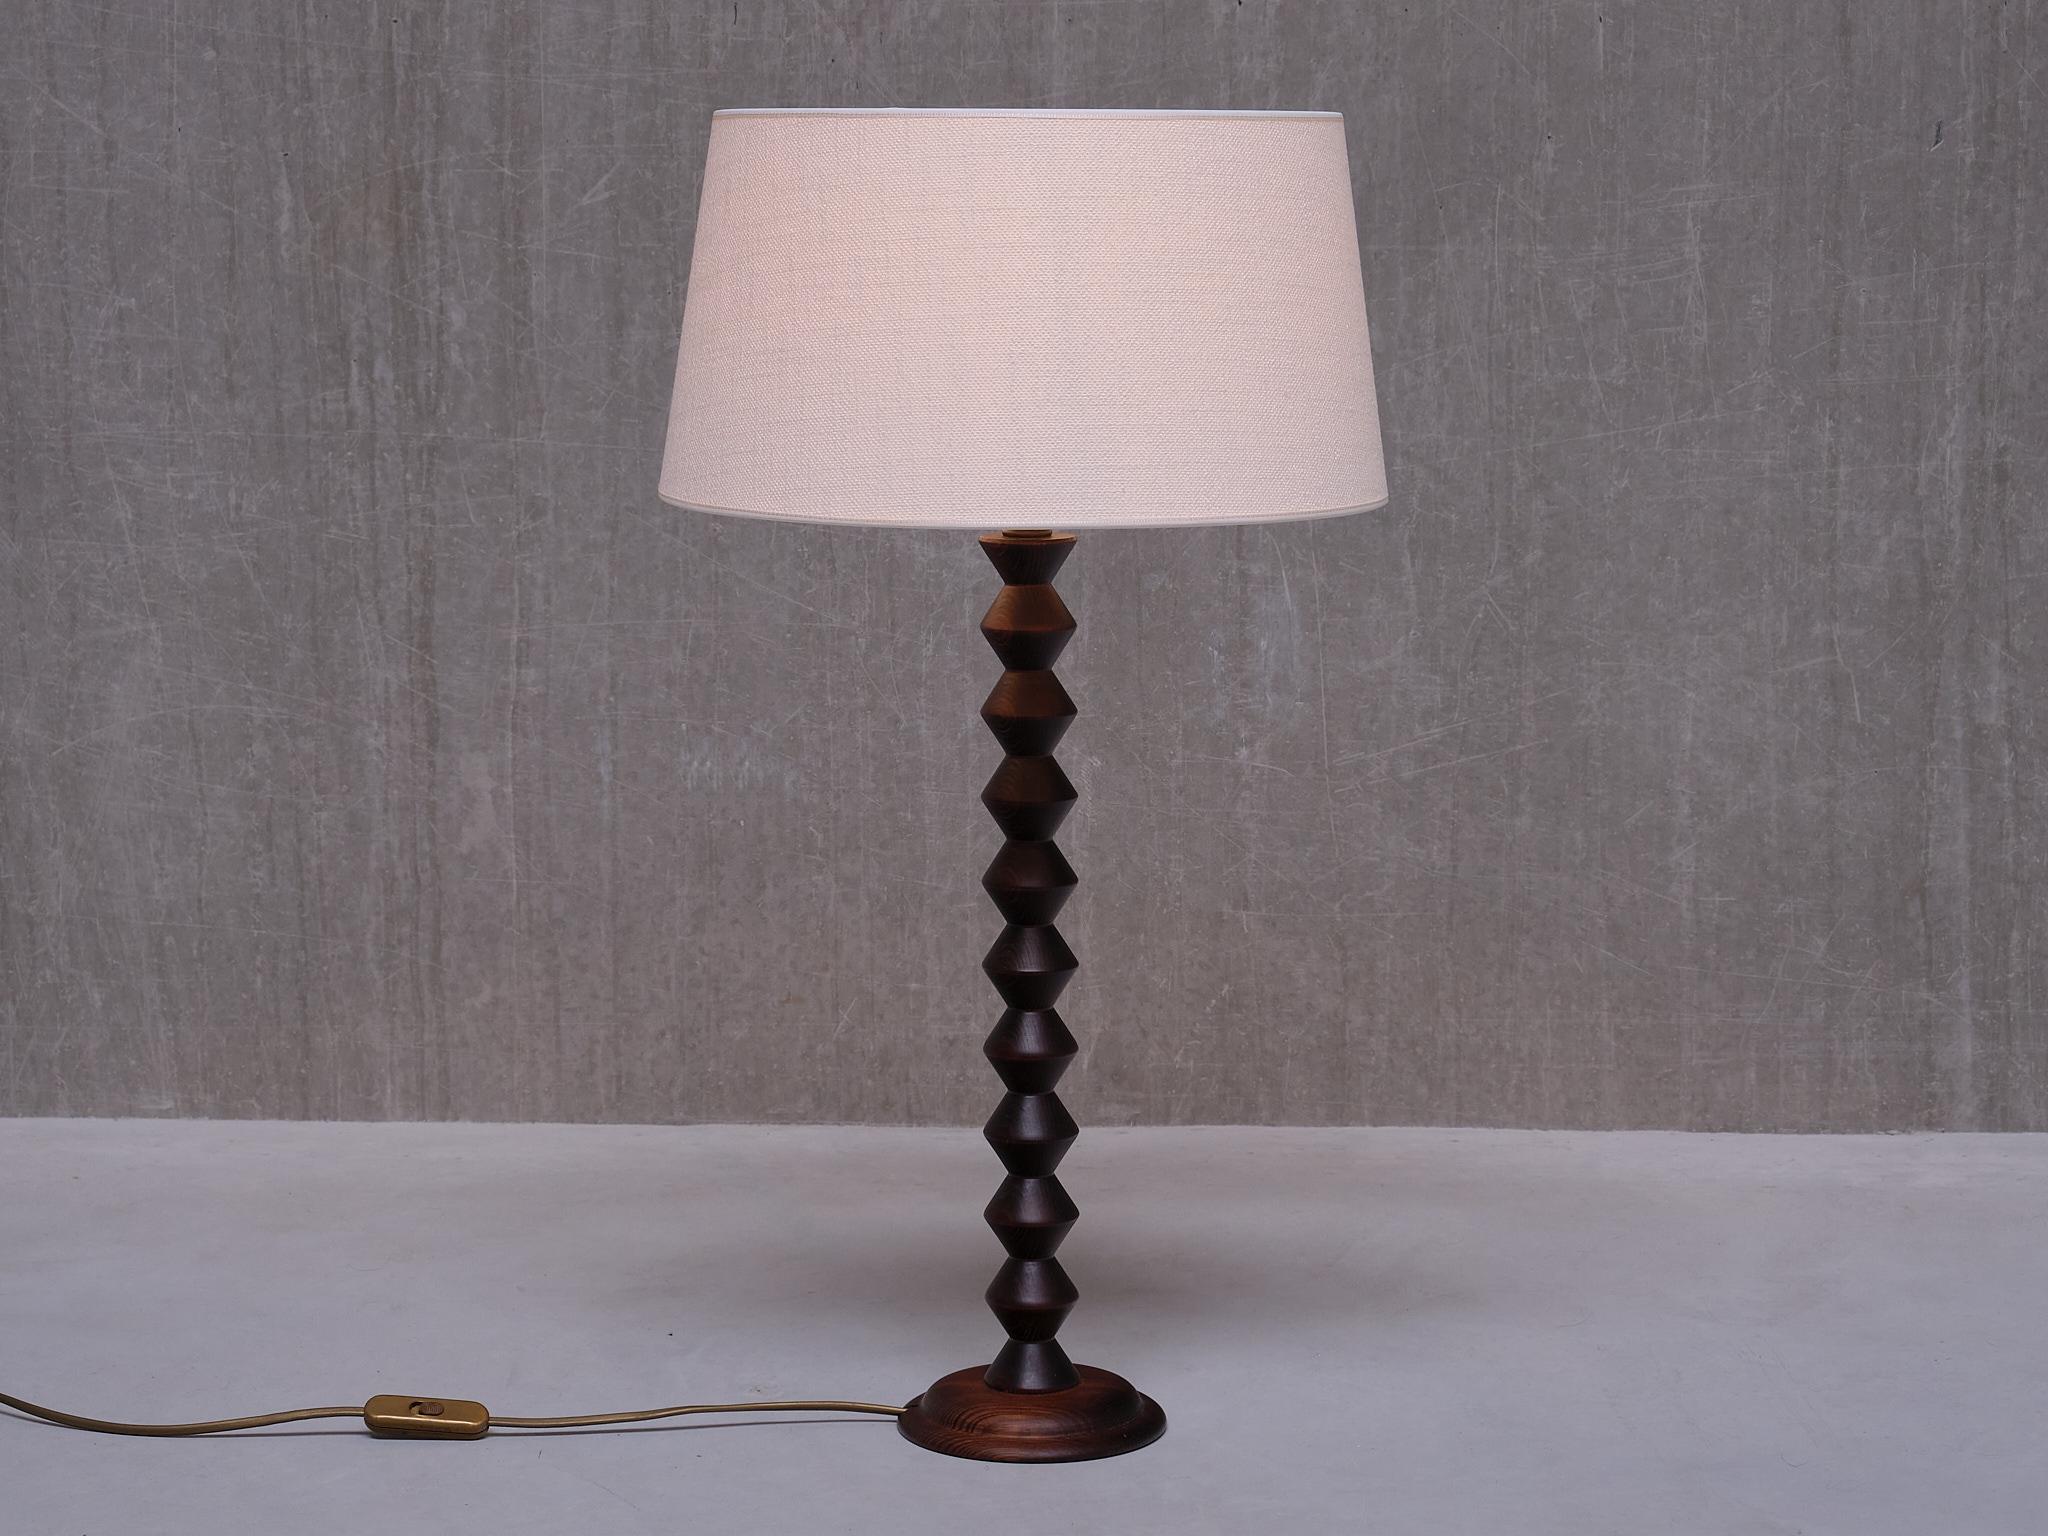 This striking tall table lamp was manufactured in France in the 1950s. The design is attributed to Charles Dudouyt. 

Crafted from dark stained oak wood, the lamp consists of a circular base and an intricately carved stem in a stacked disc shape.